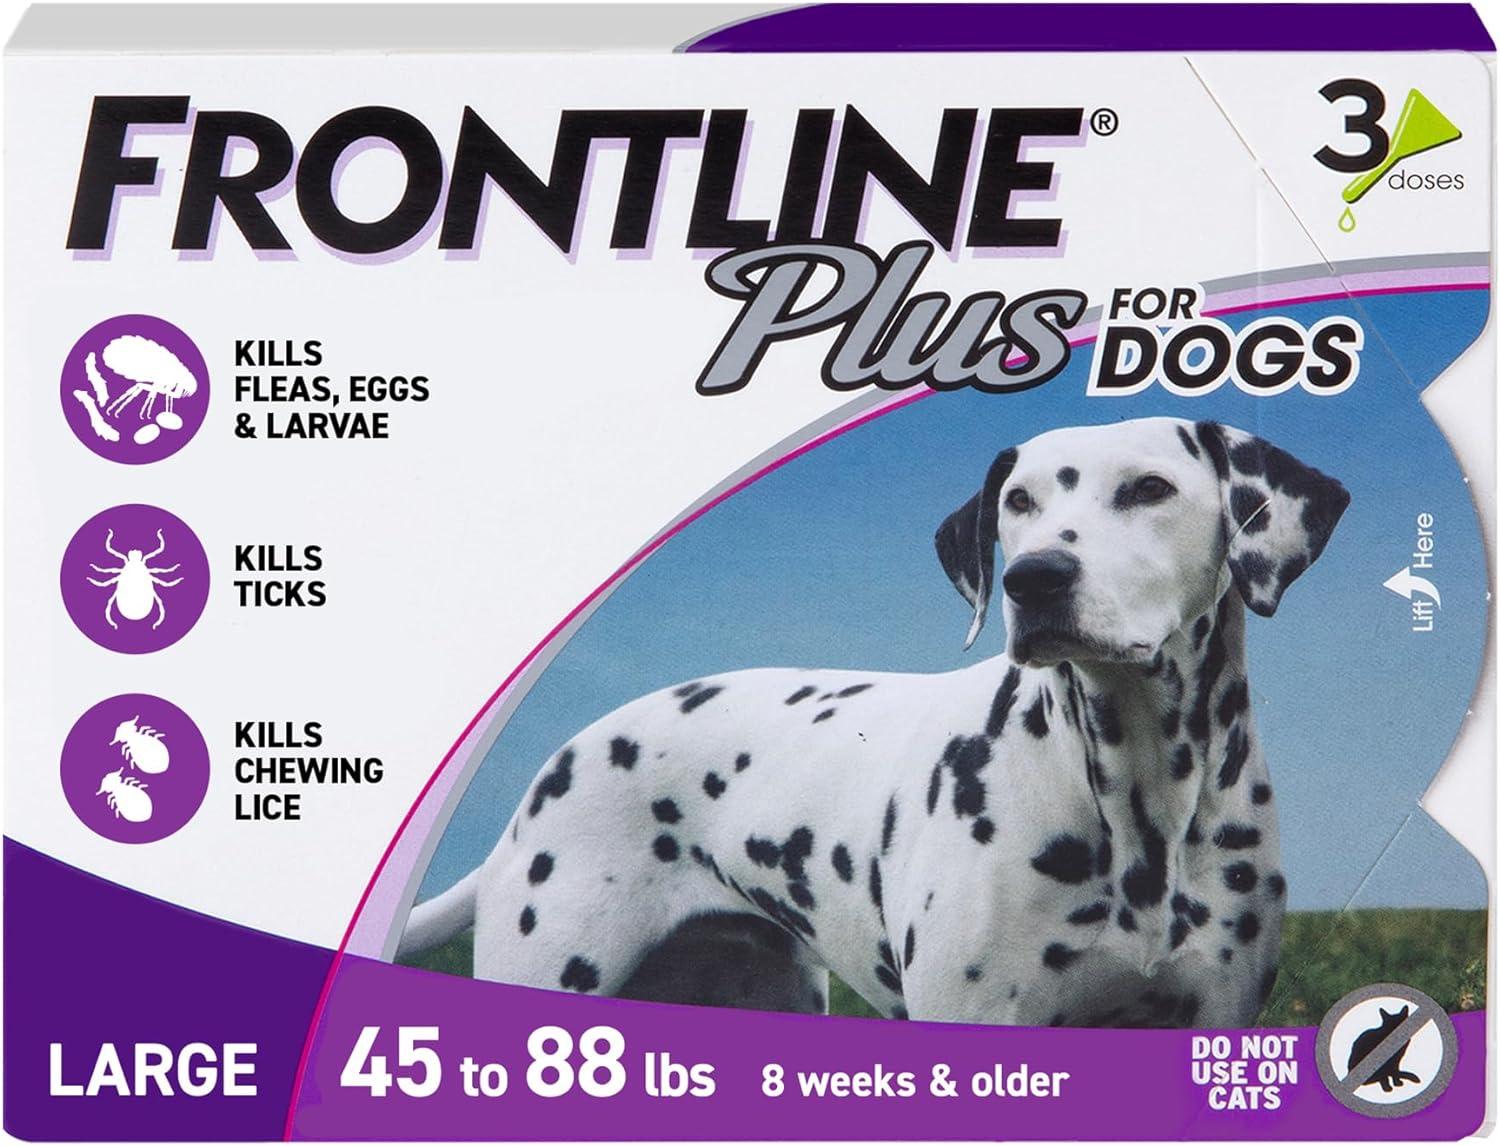 Frontline Plus 3-Dose Flea and Tick Treatment for $25.18 Shipped